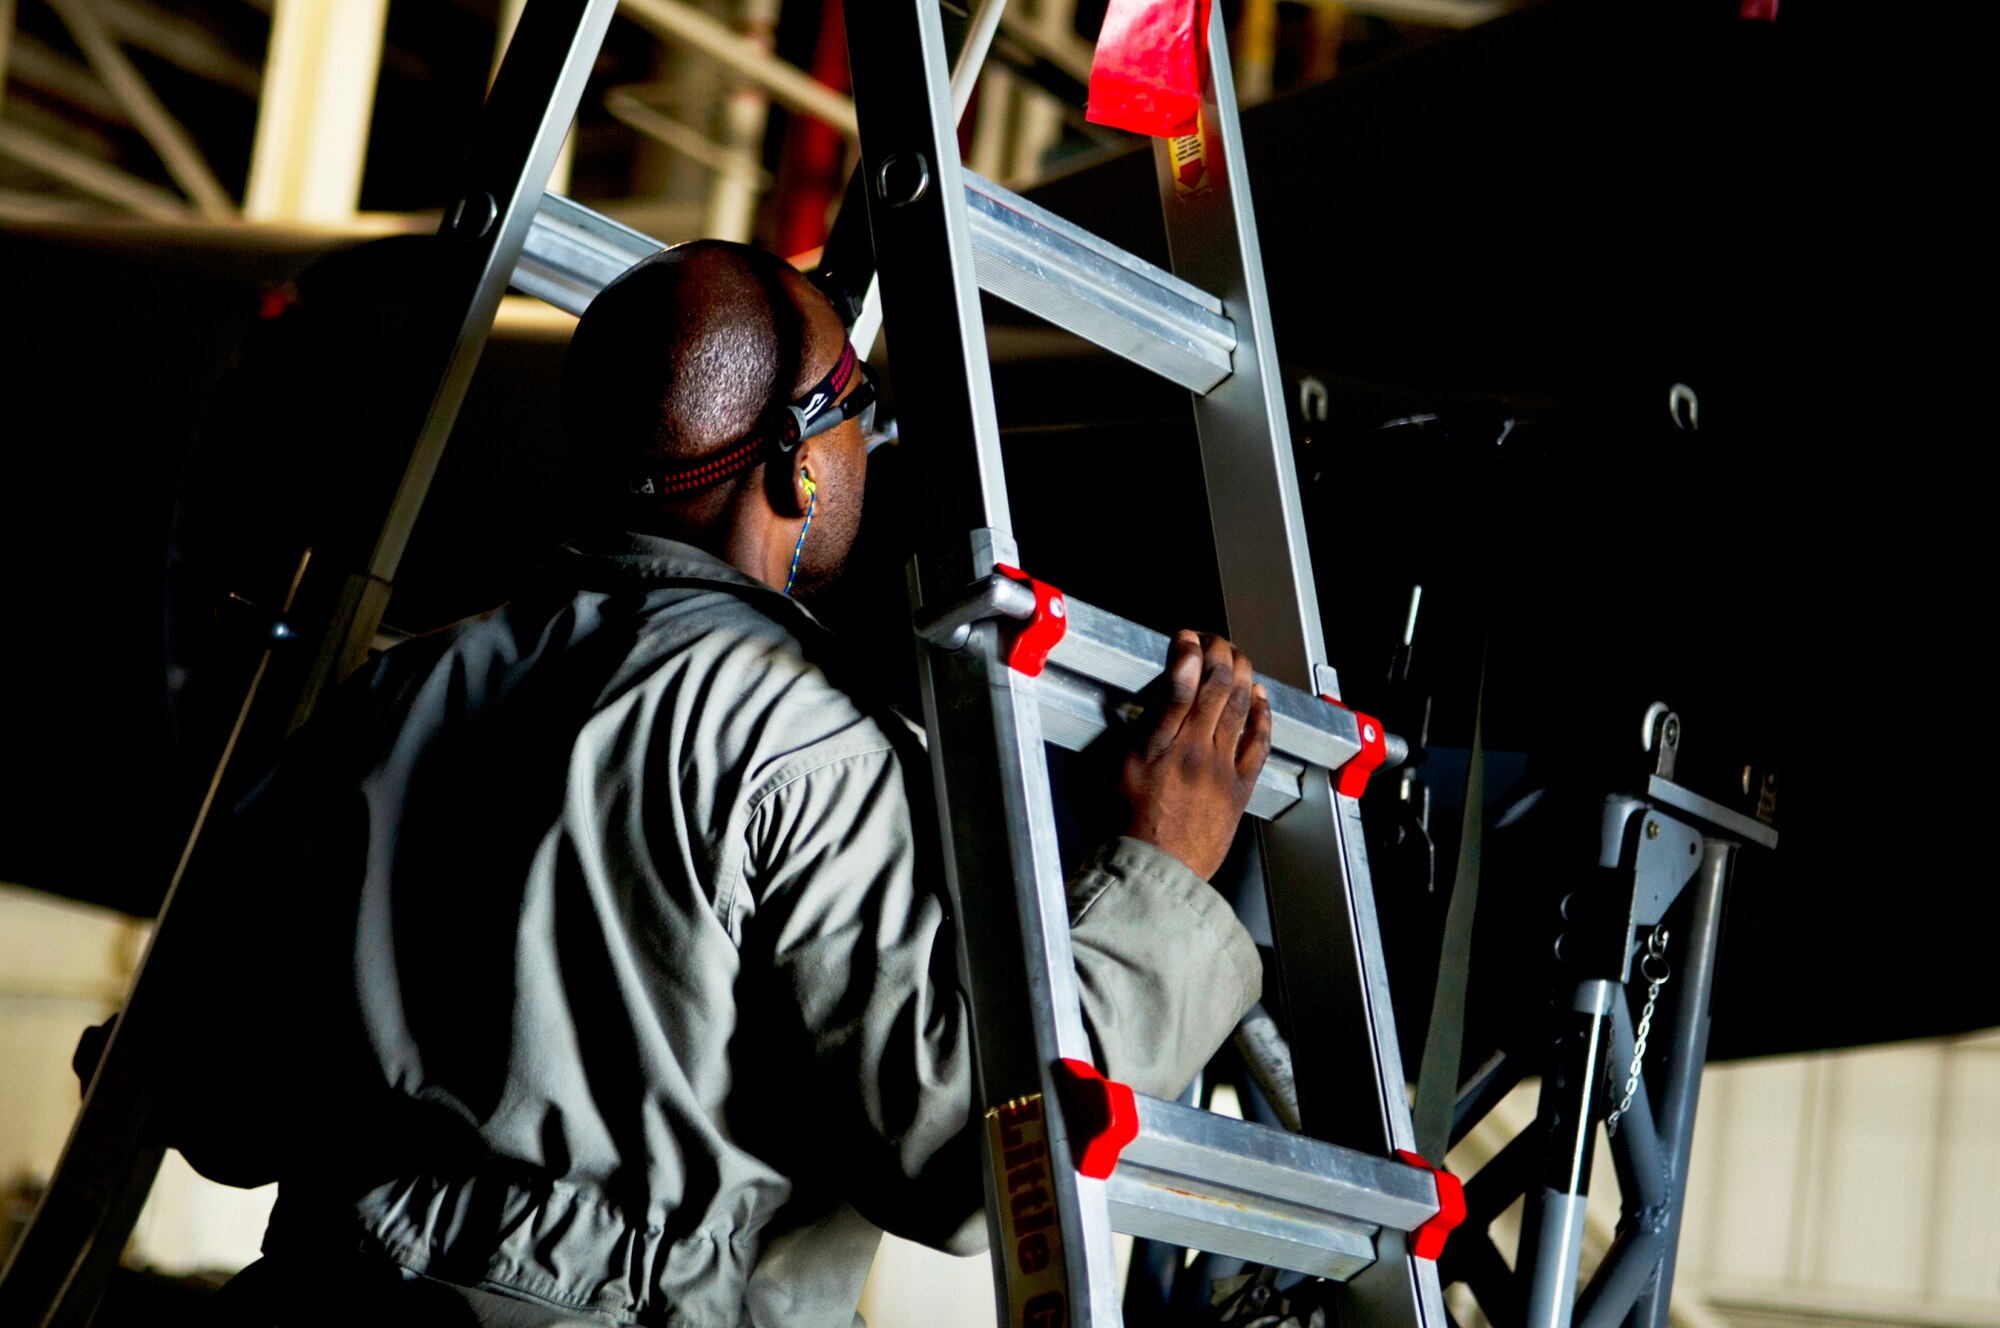 Staff Sgt. Kelvin McCrea, 5th Aircraft Maintenance Squadron weapons load crew member, carries a ladder to a B-52H Stratofortress during a weapons load on Minot Air Force Base, N.D., Sept. 5, 2014. McCrea is a part of the weapons load crew competing in the 2014 Global Strike Challenge. (U.S. Air Force photo/Senior Airman Brittany Y. Bateman)